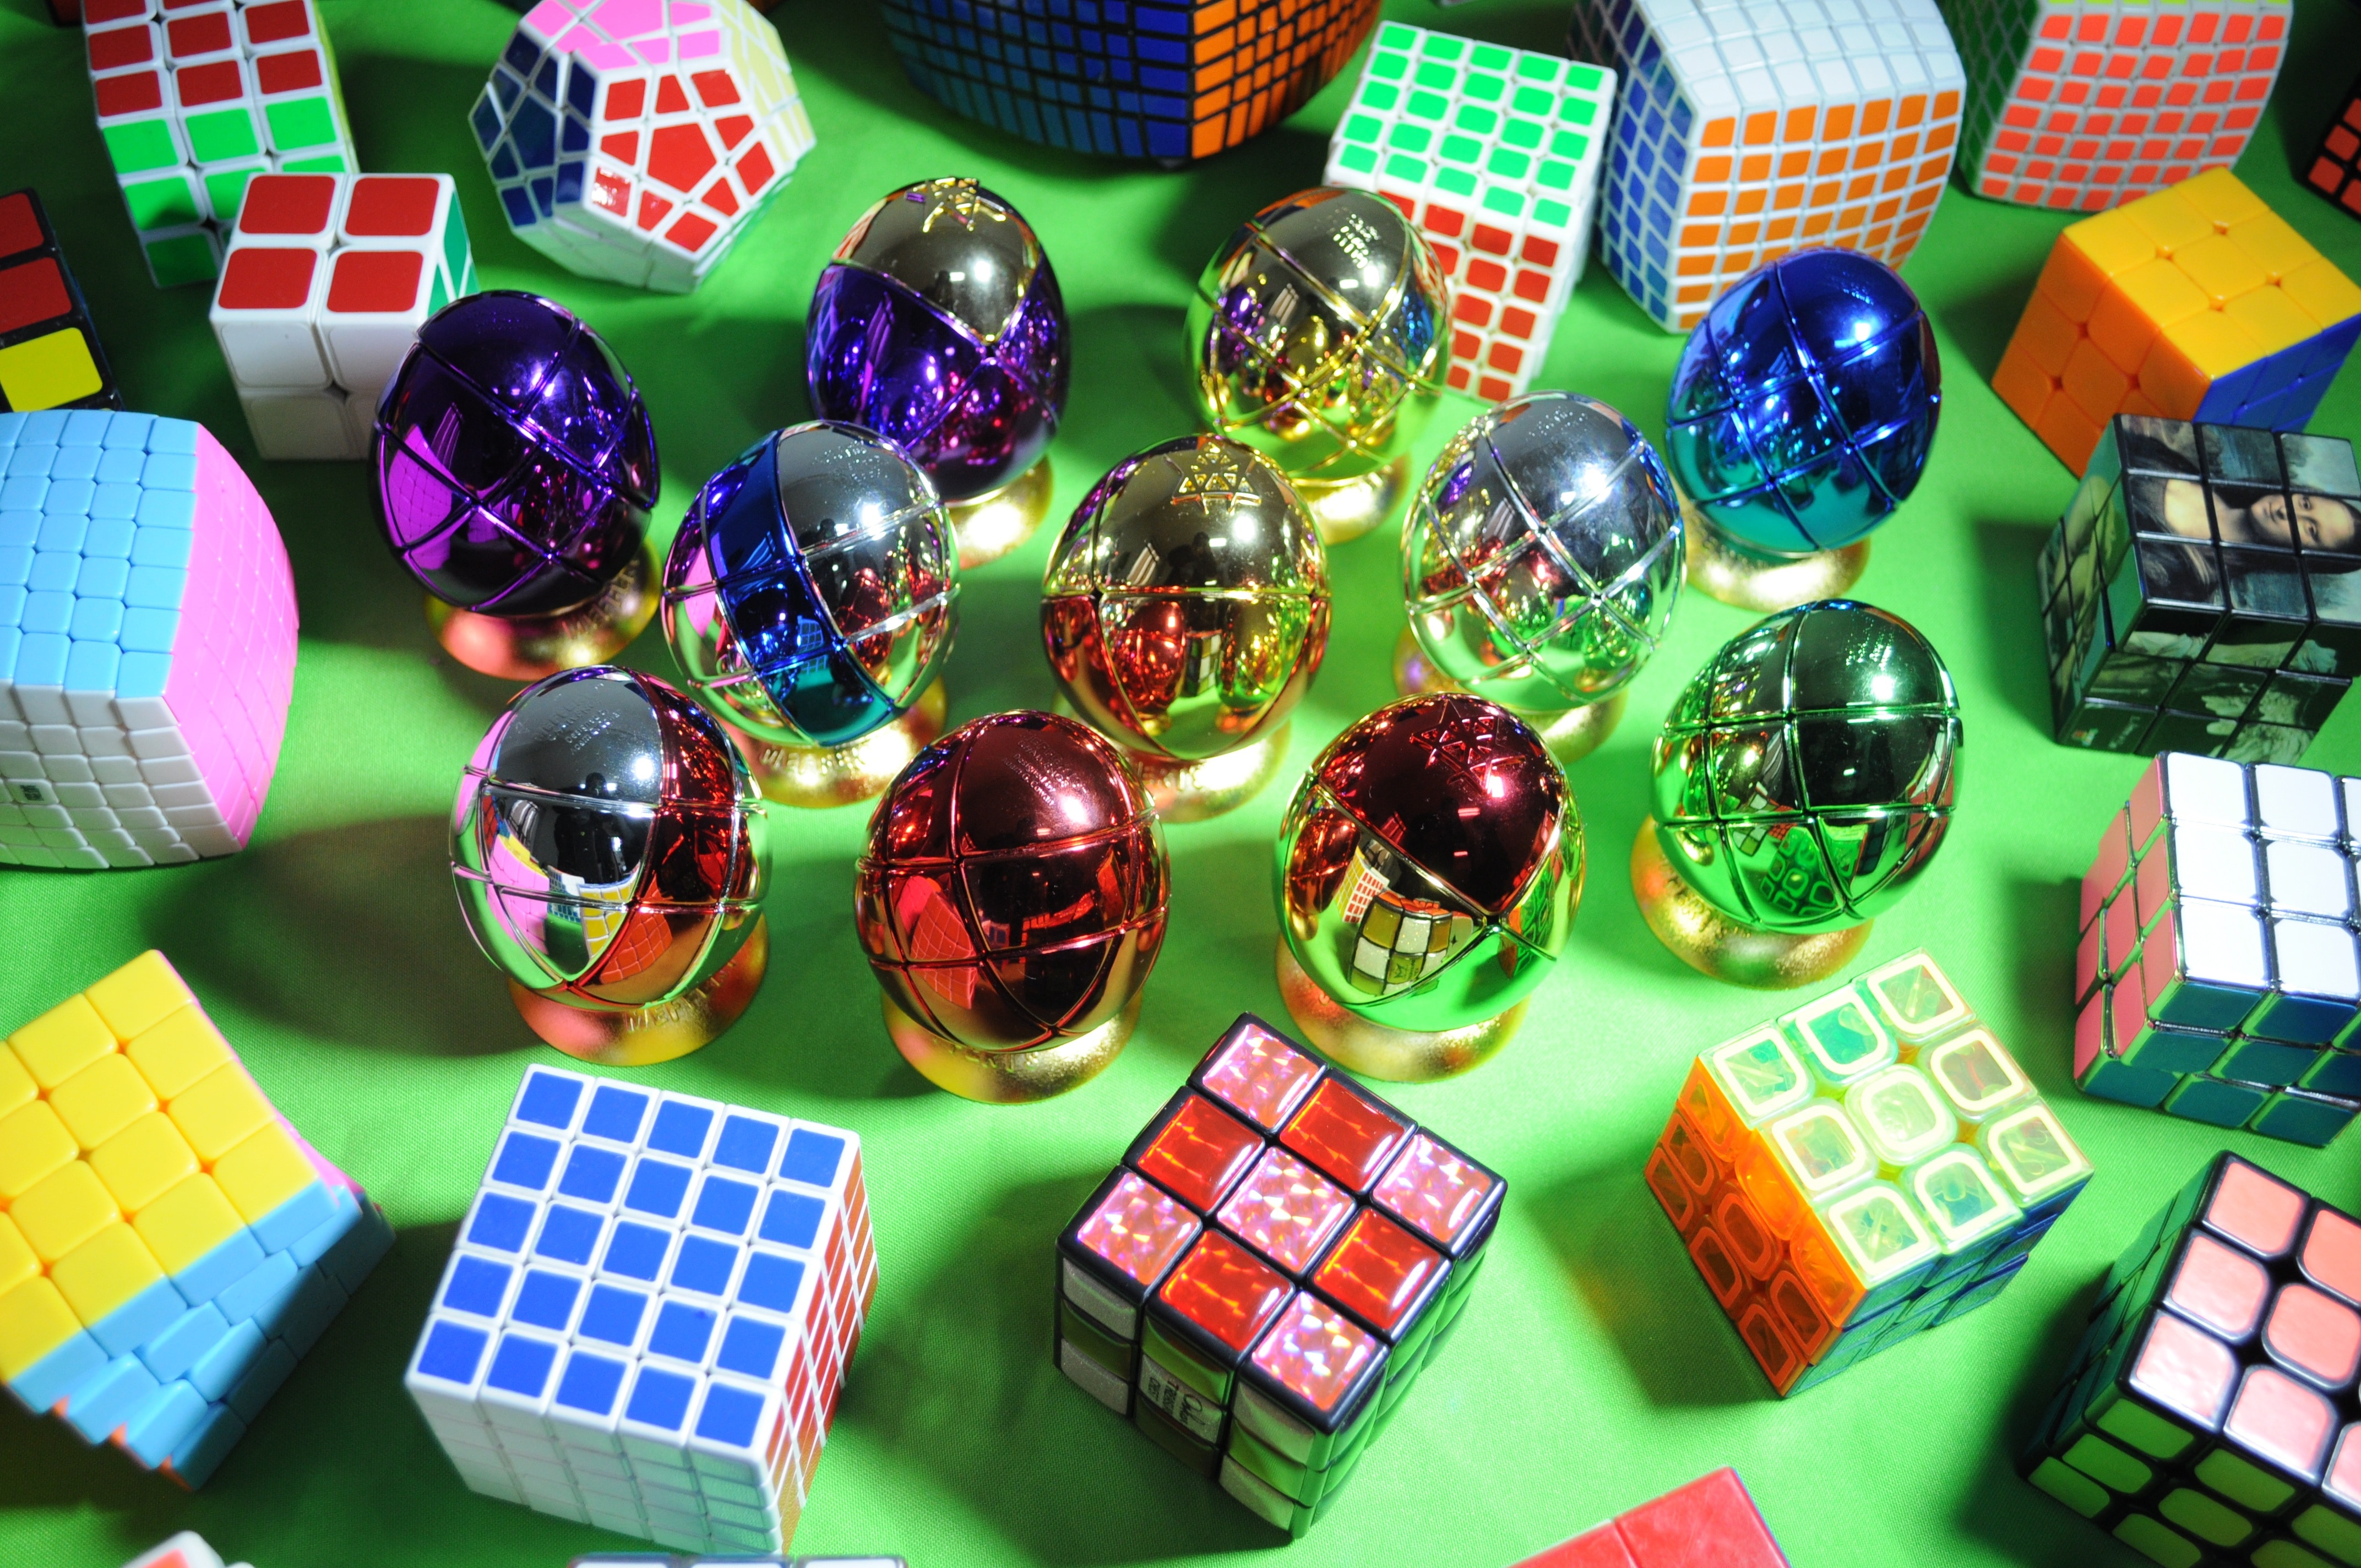 rukib's cube collection